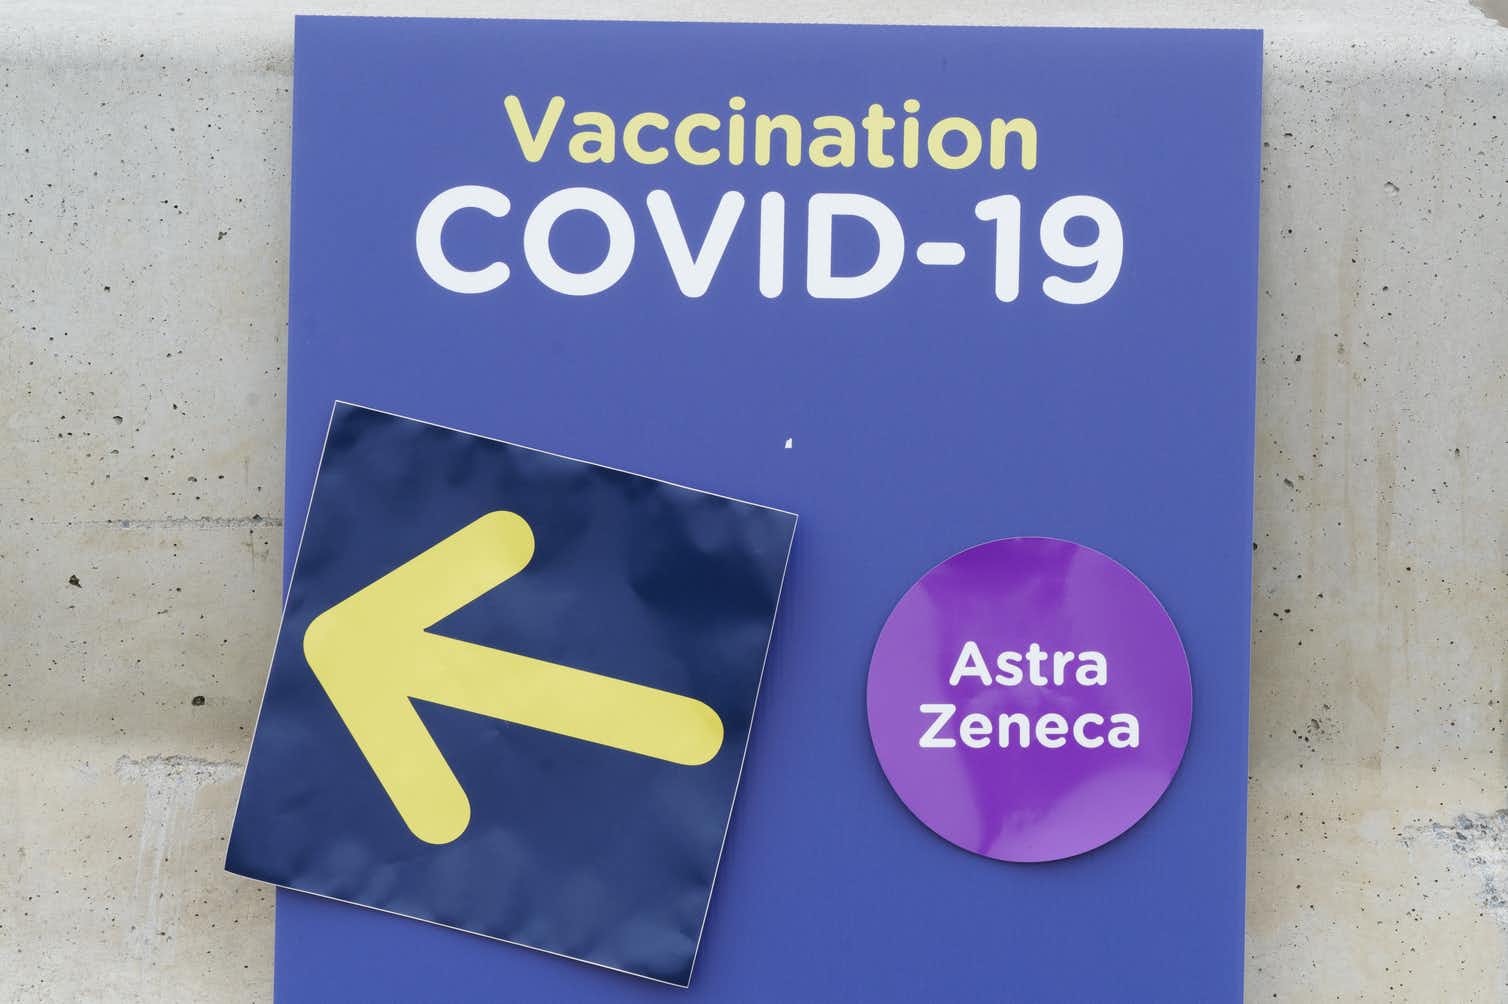 Some may prefer the proven approach of receiving two doses of AstraZeneca vaccine. (Photo: THE CANADIAN PRESS/Paul Chiasson) 